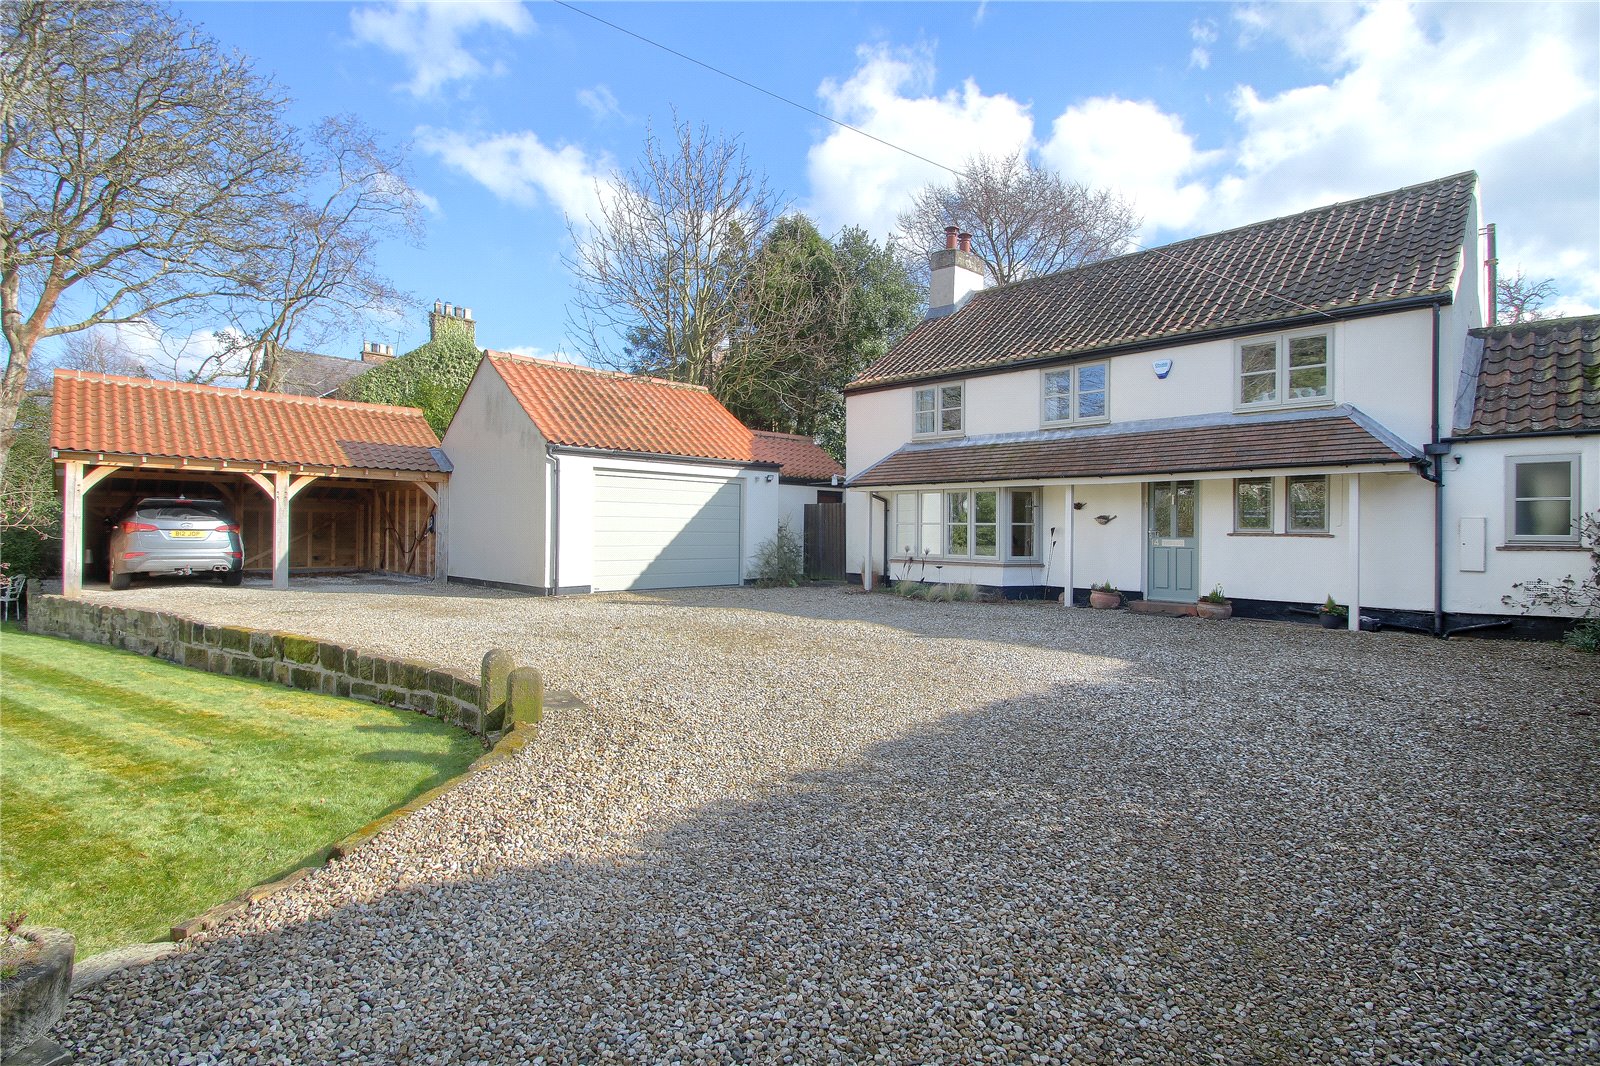 4 bed house for sale in Enterpen, Hutton Rudby - Property Image 1